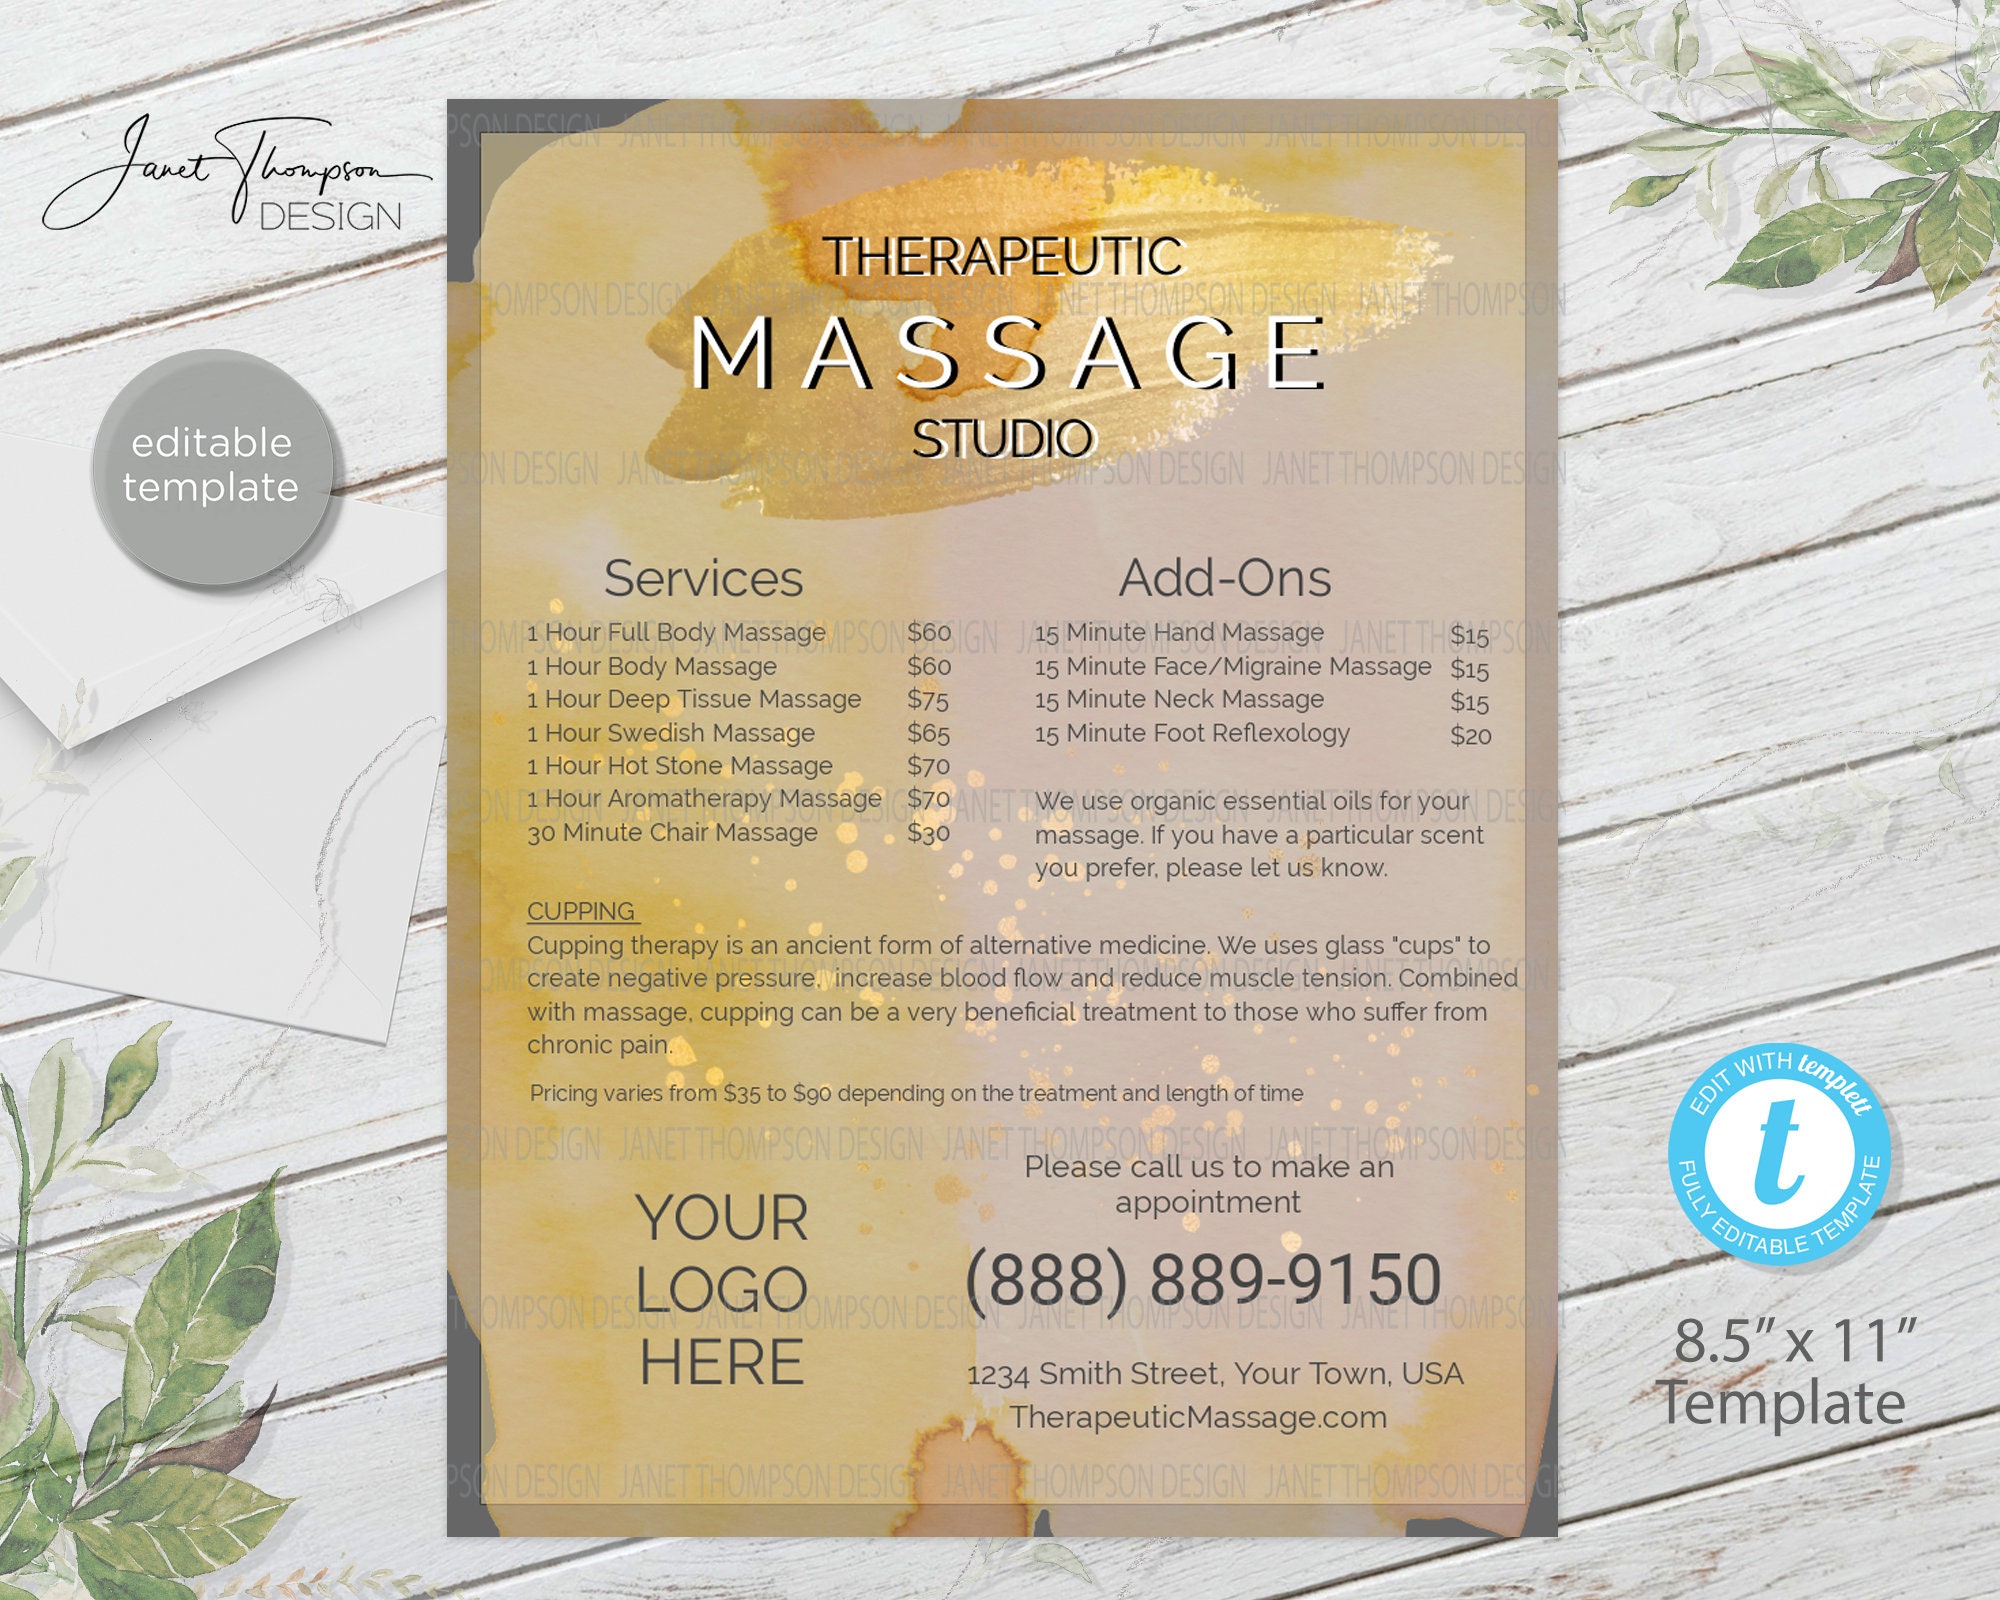 MASSAGE SERVICES & PRICING